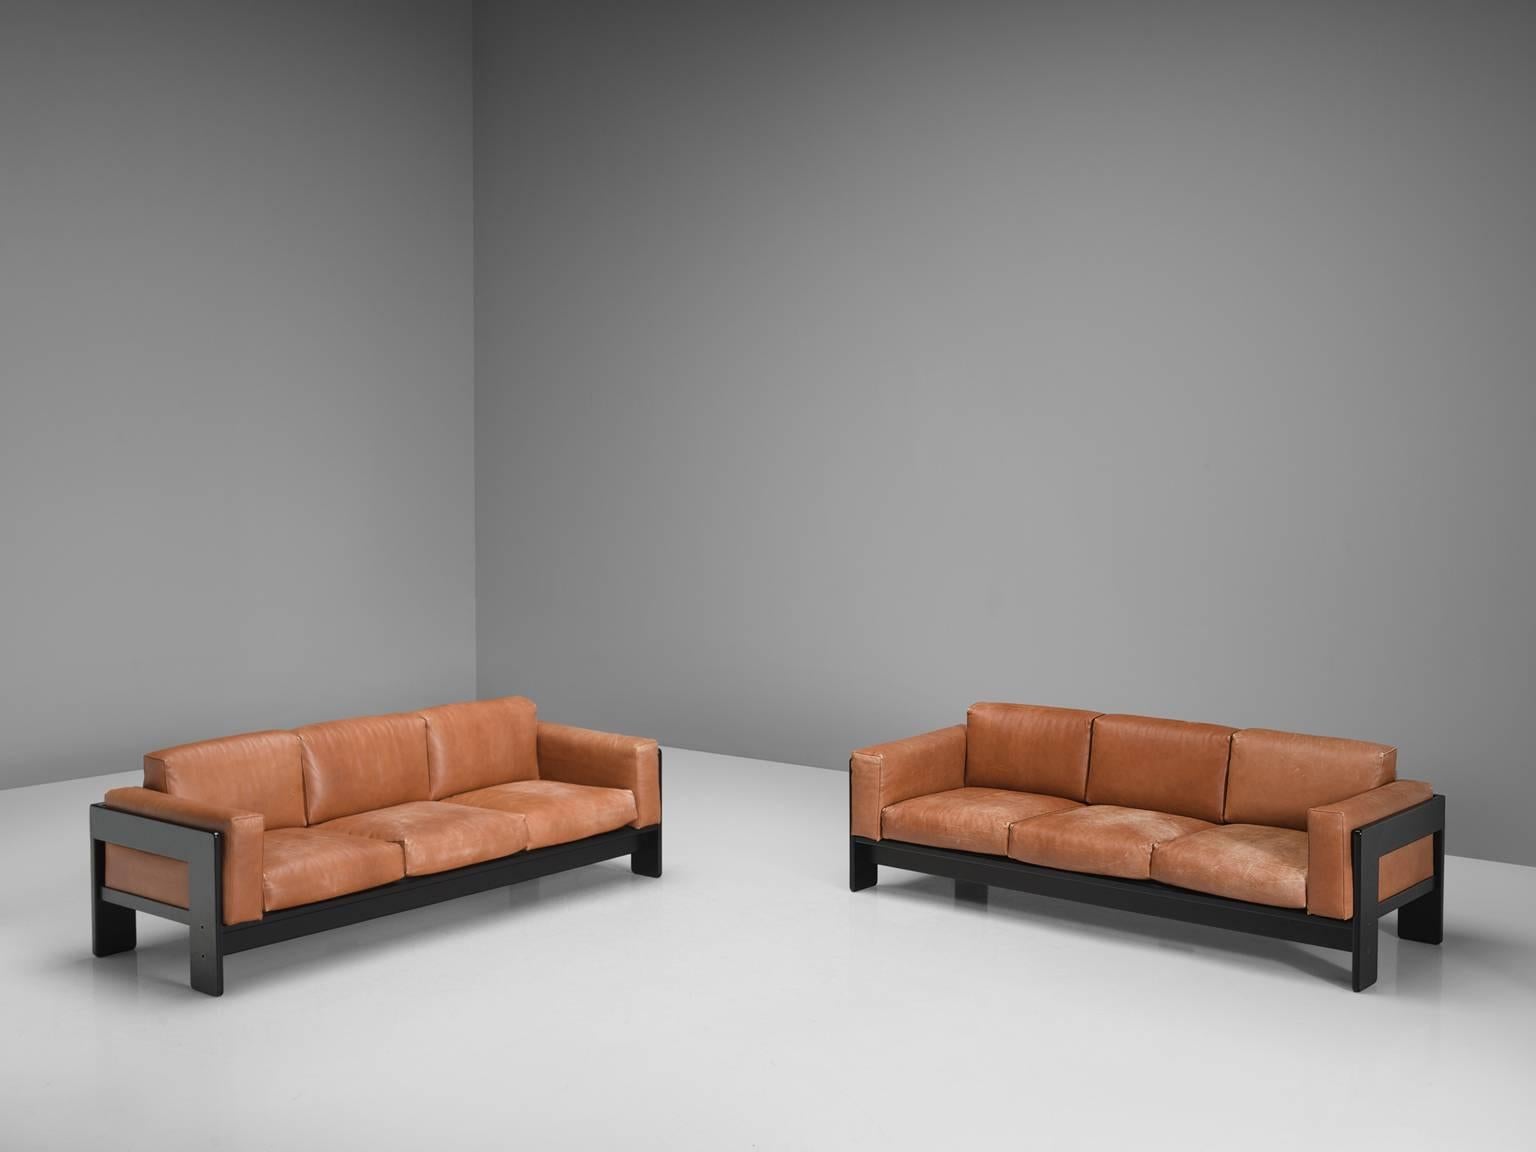 Late 20th Century Pair of 'Bastiano' Sofas by Tobia Scarpa for Knoll